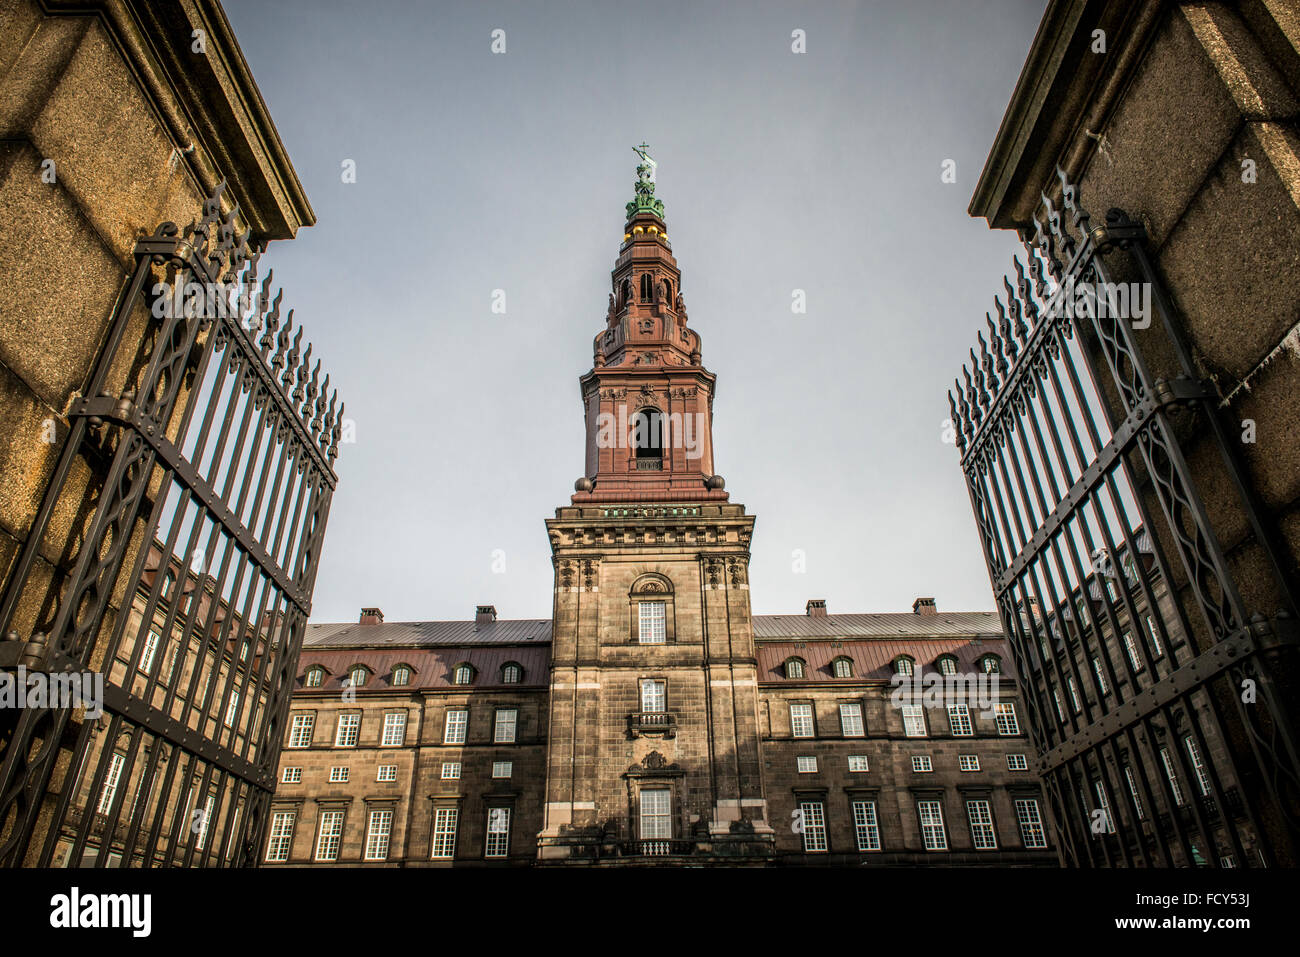 Christiansborg Palace is a palace and government building on the islet of Slotsholmen in central Copenhagen, Denmark. It is the Stock Photo